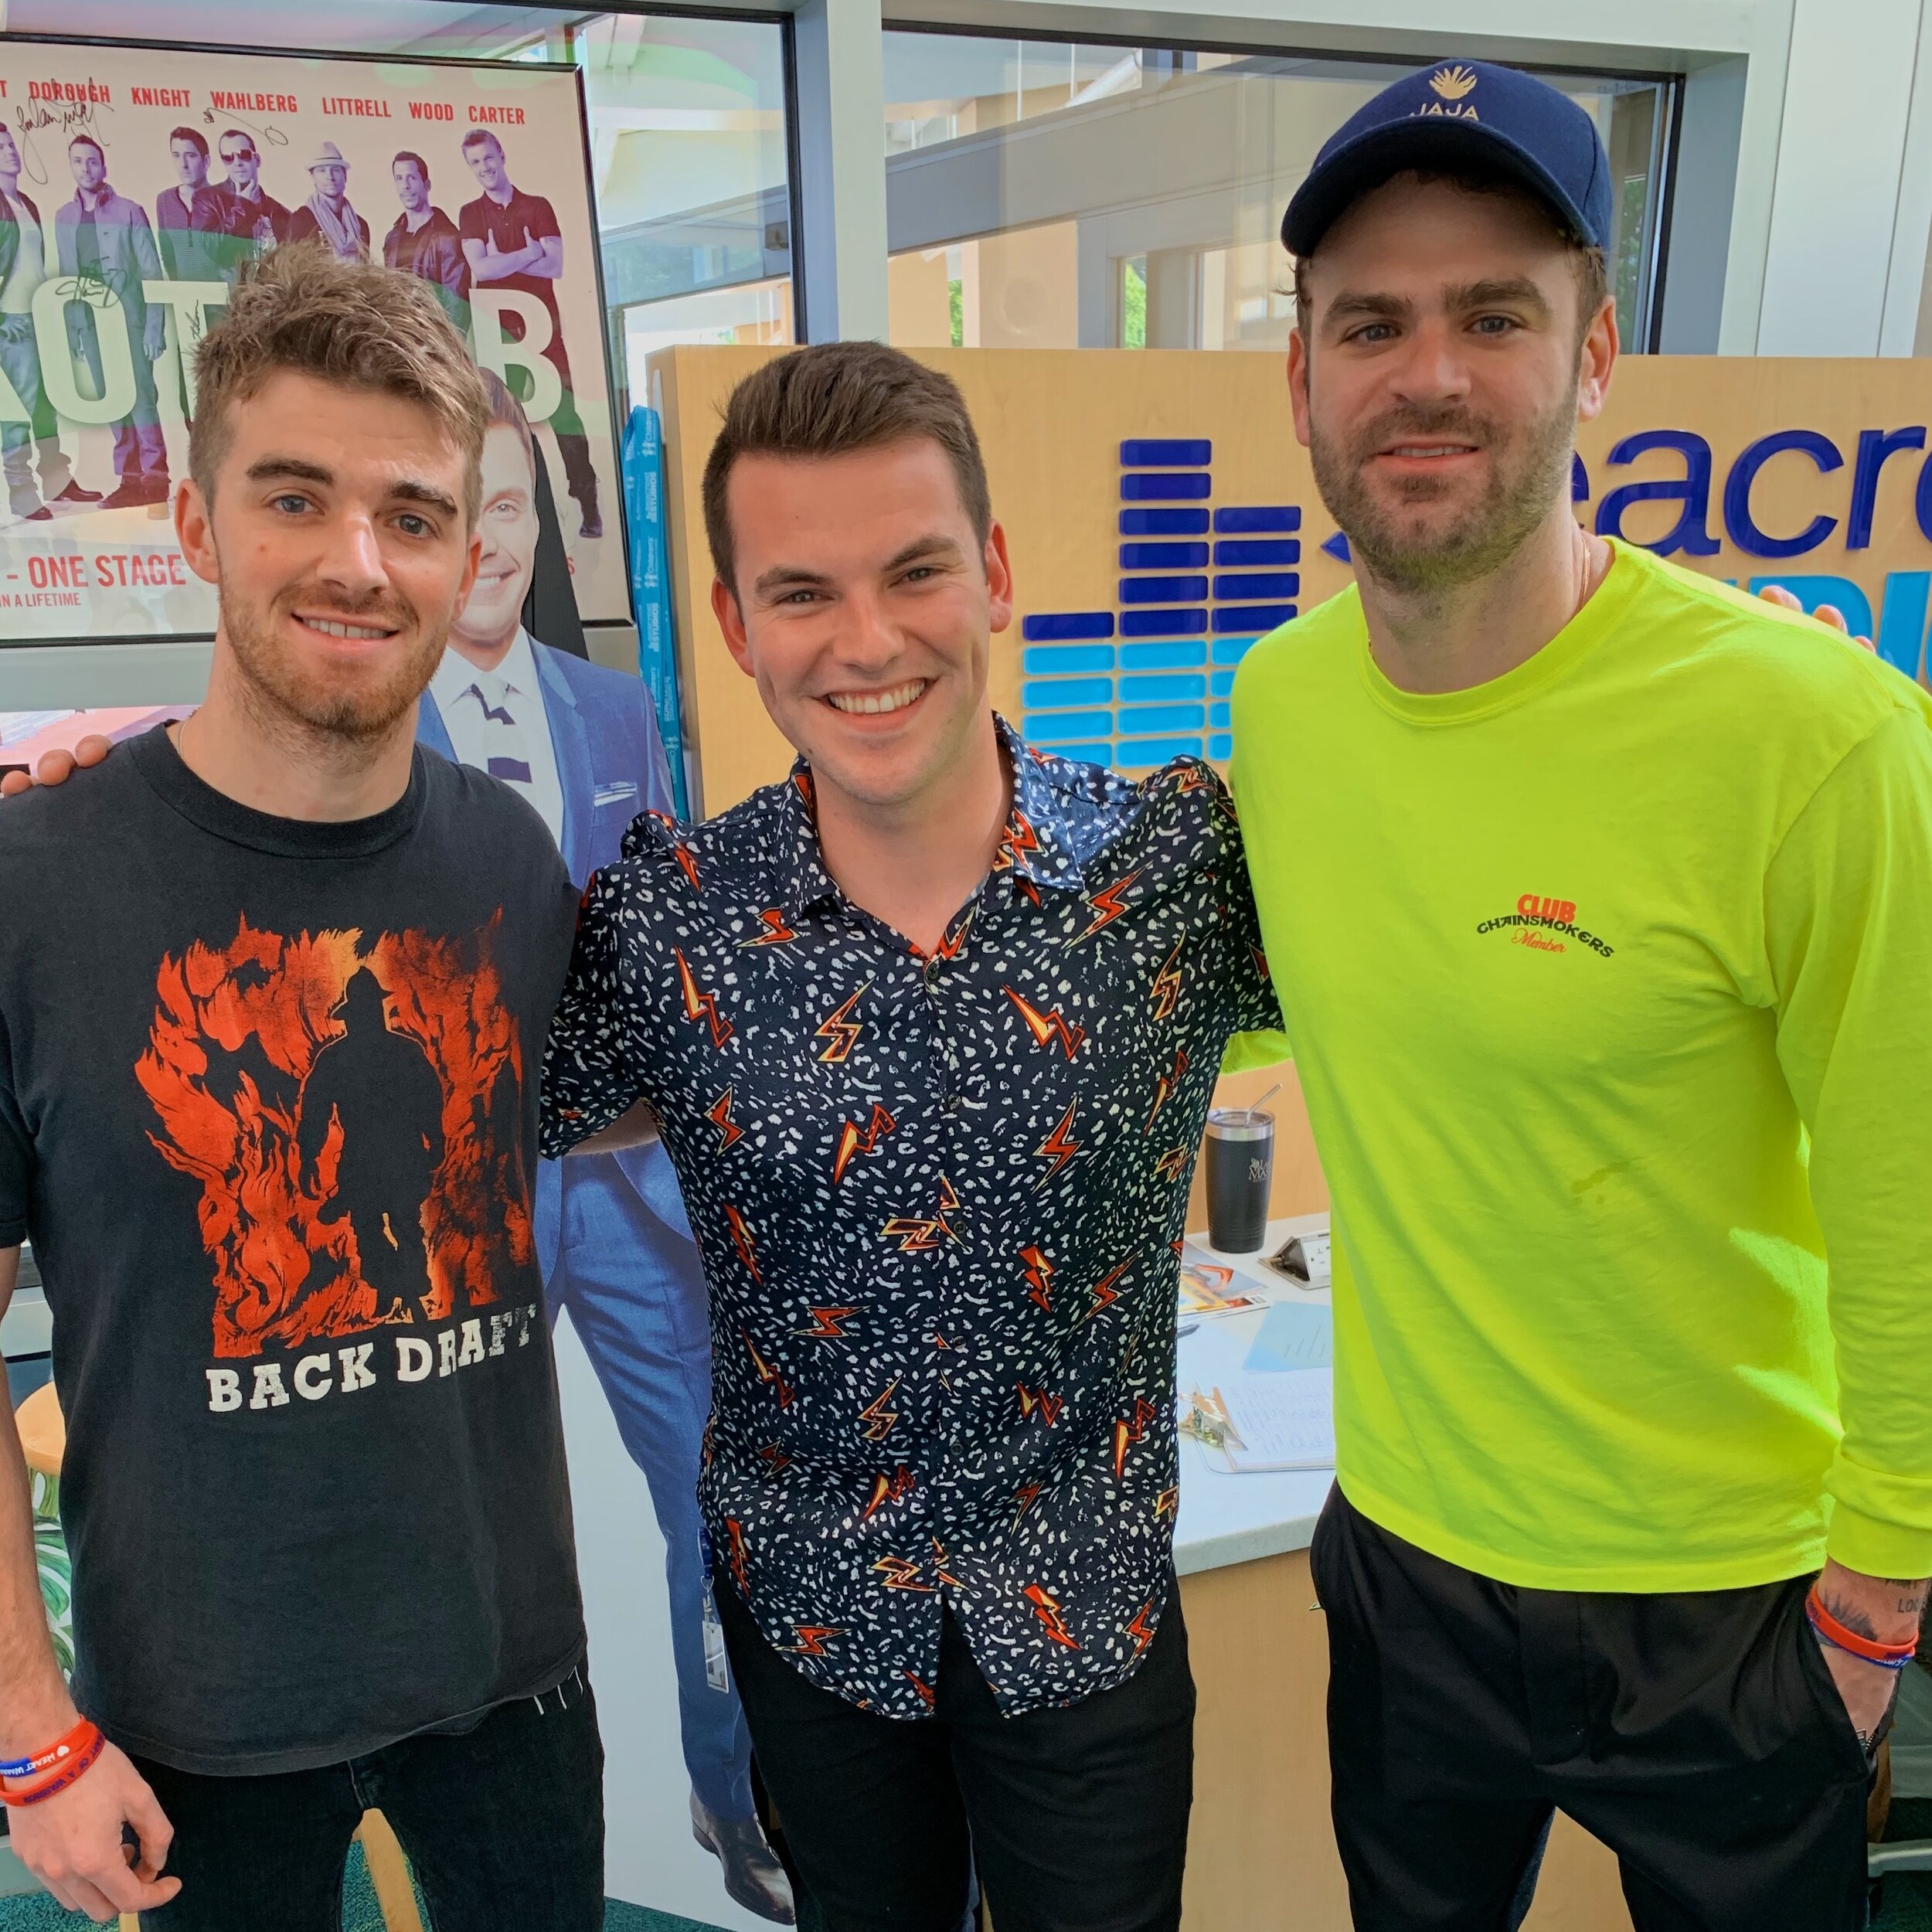 INTERVIEW WITH THE CHAINSMOKERS